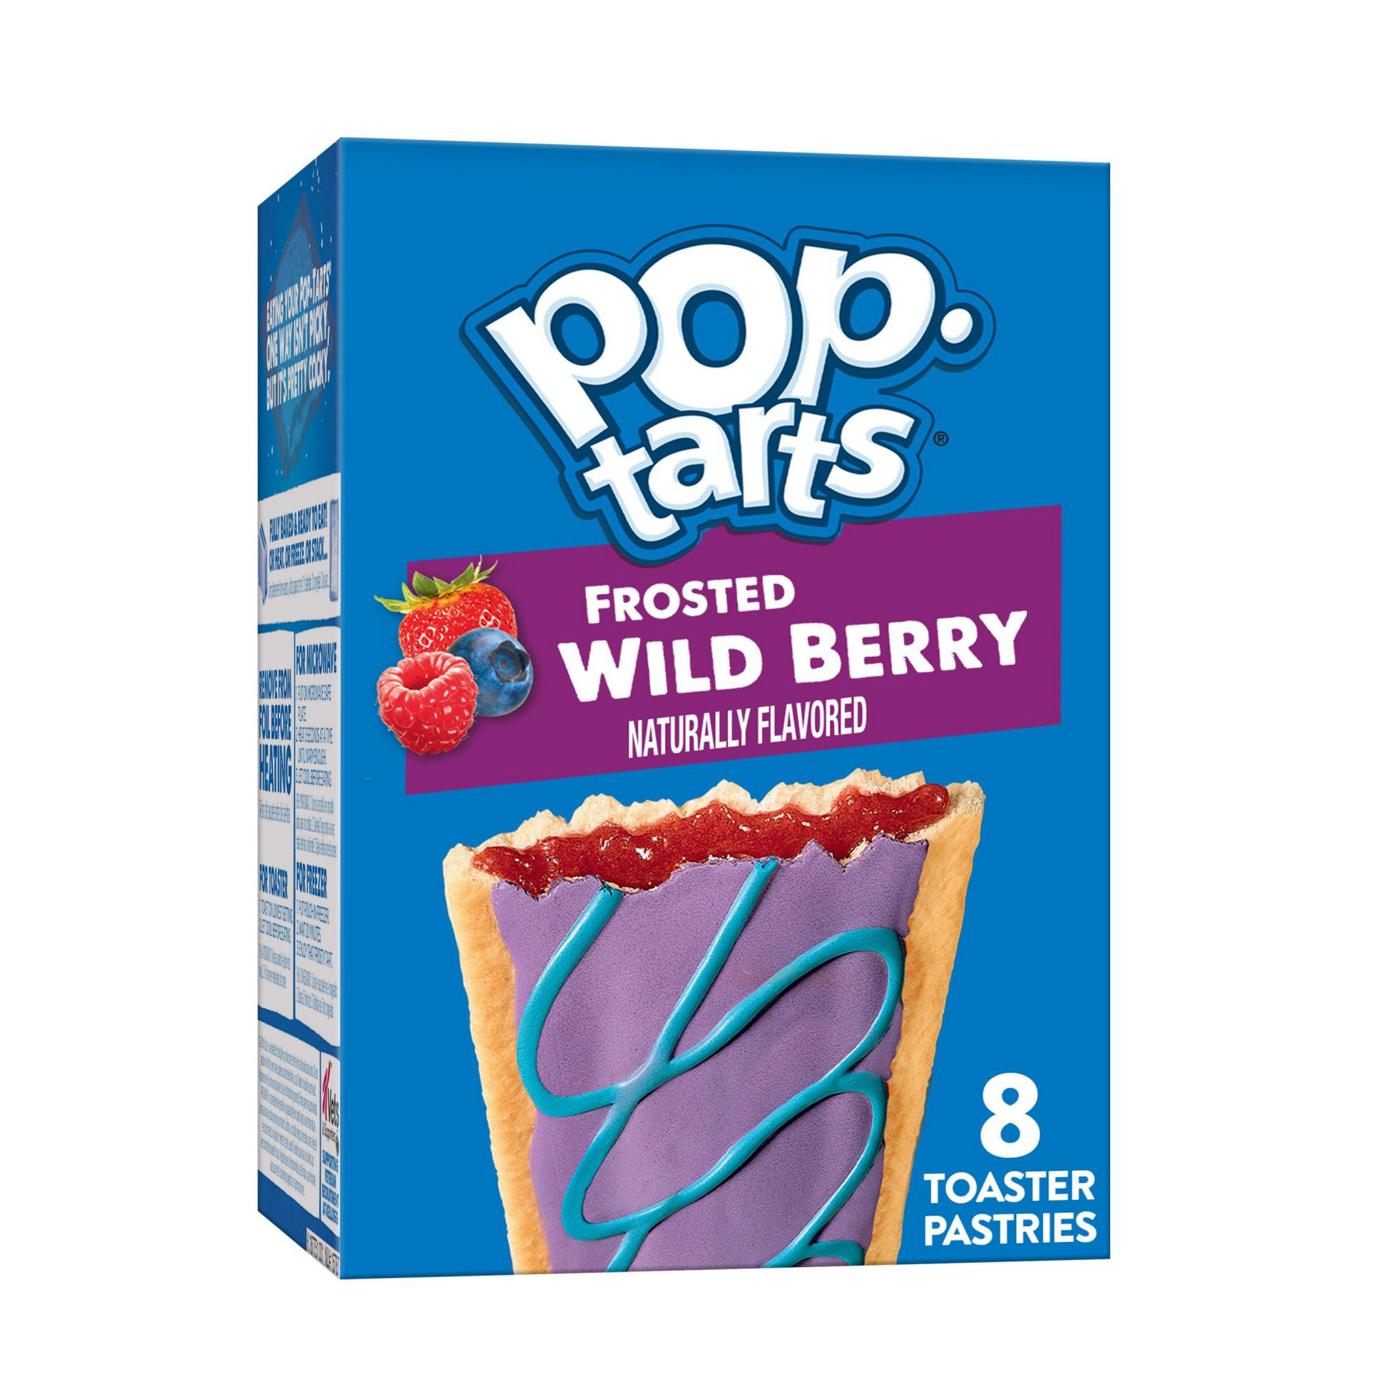 Pop-Tarts Frosted Wild Berry Toaster Pastries; image 5 of 6